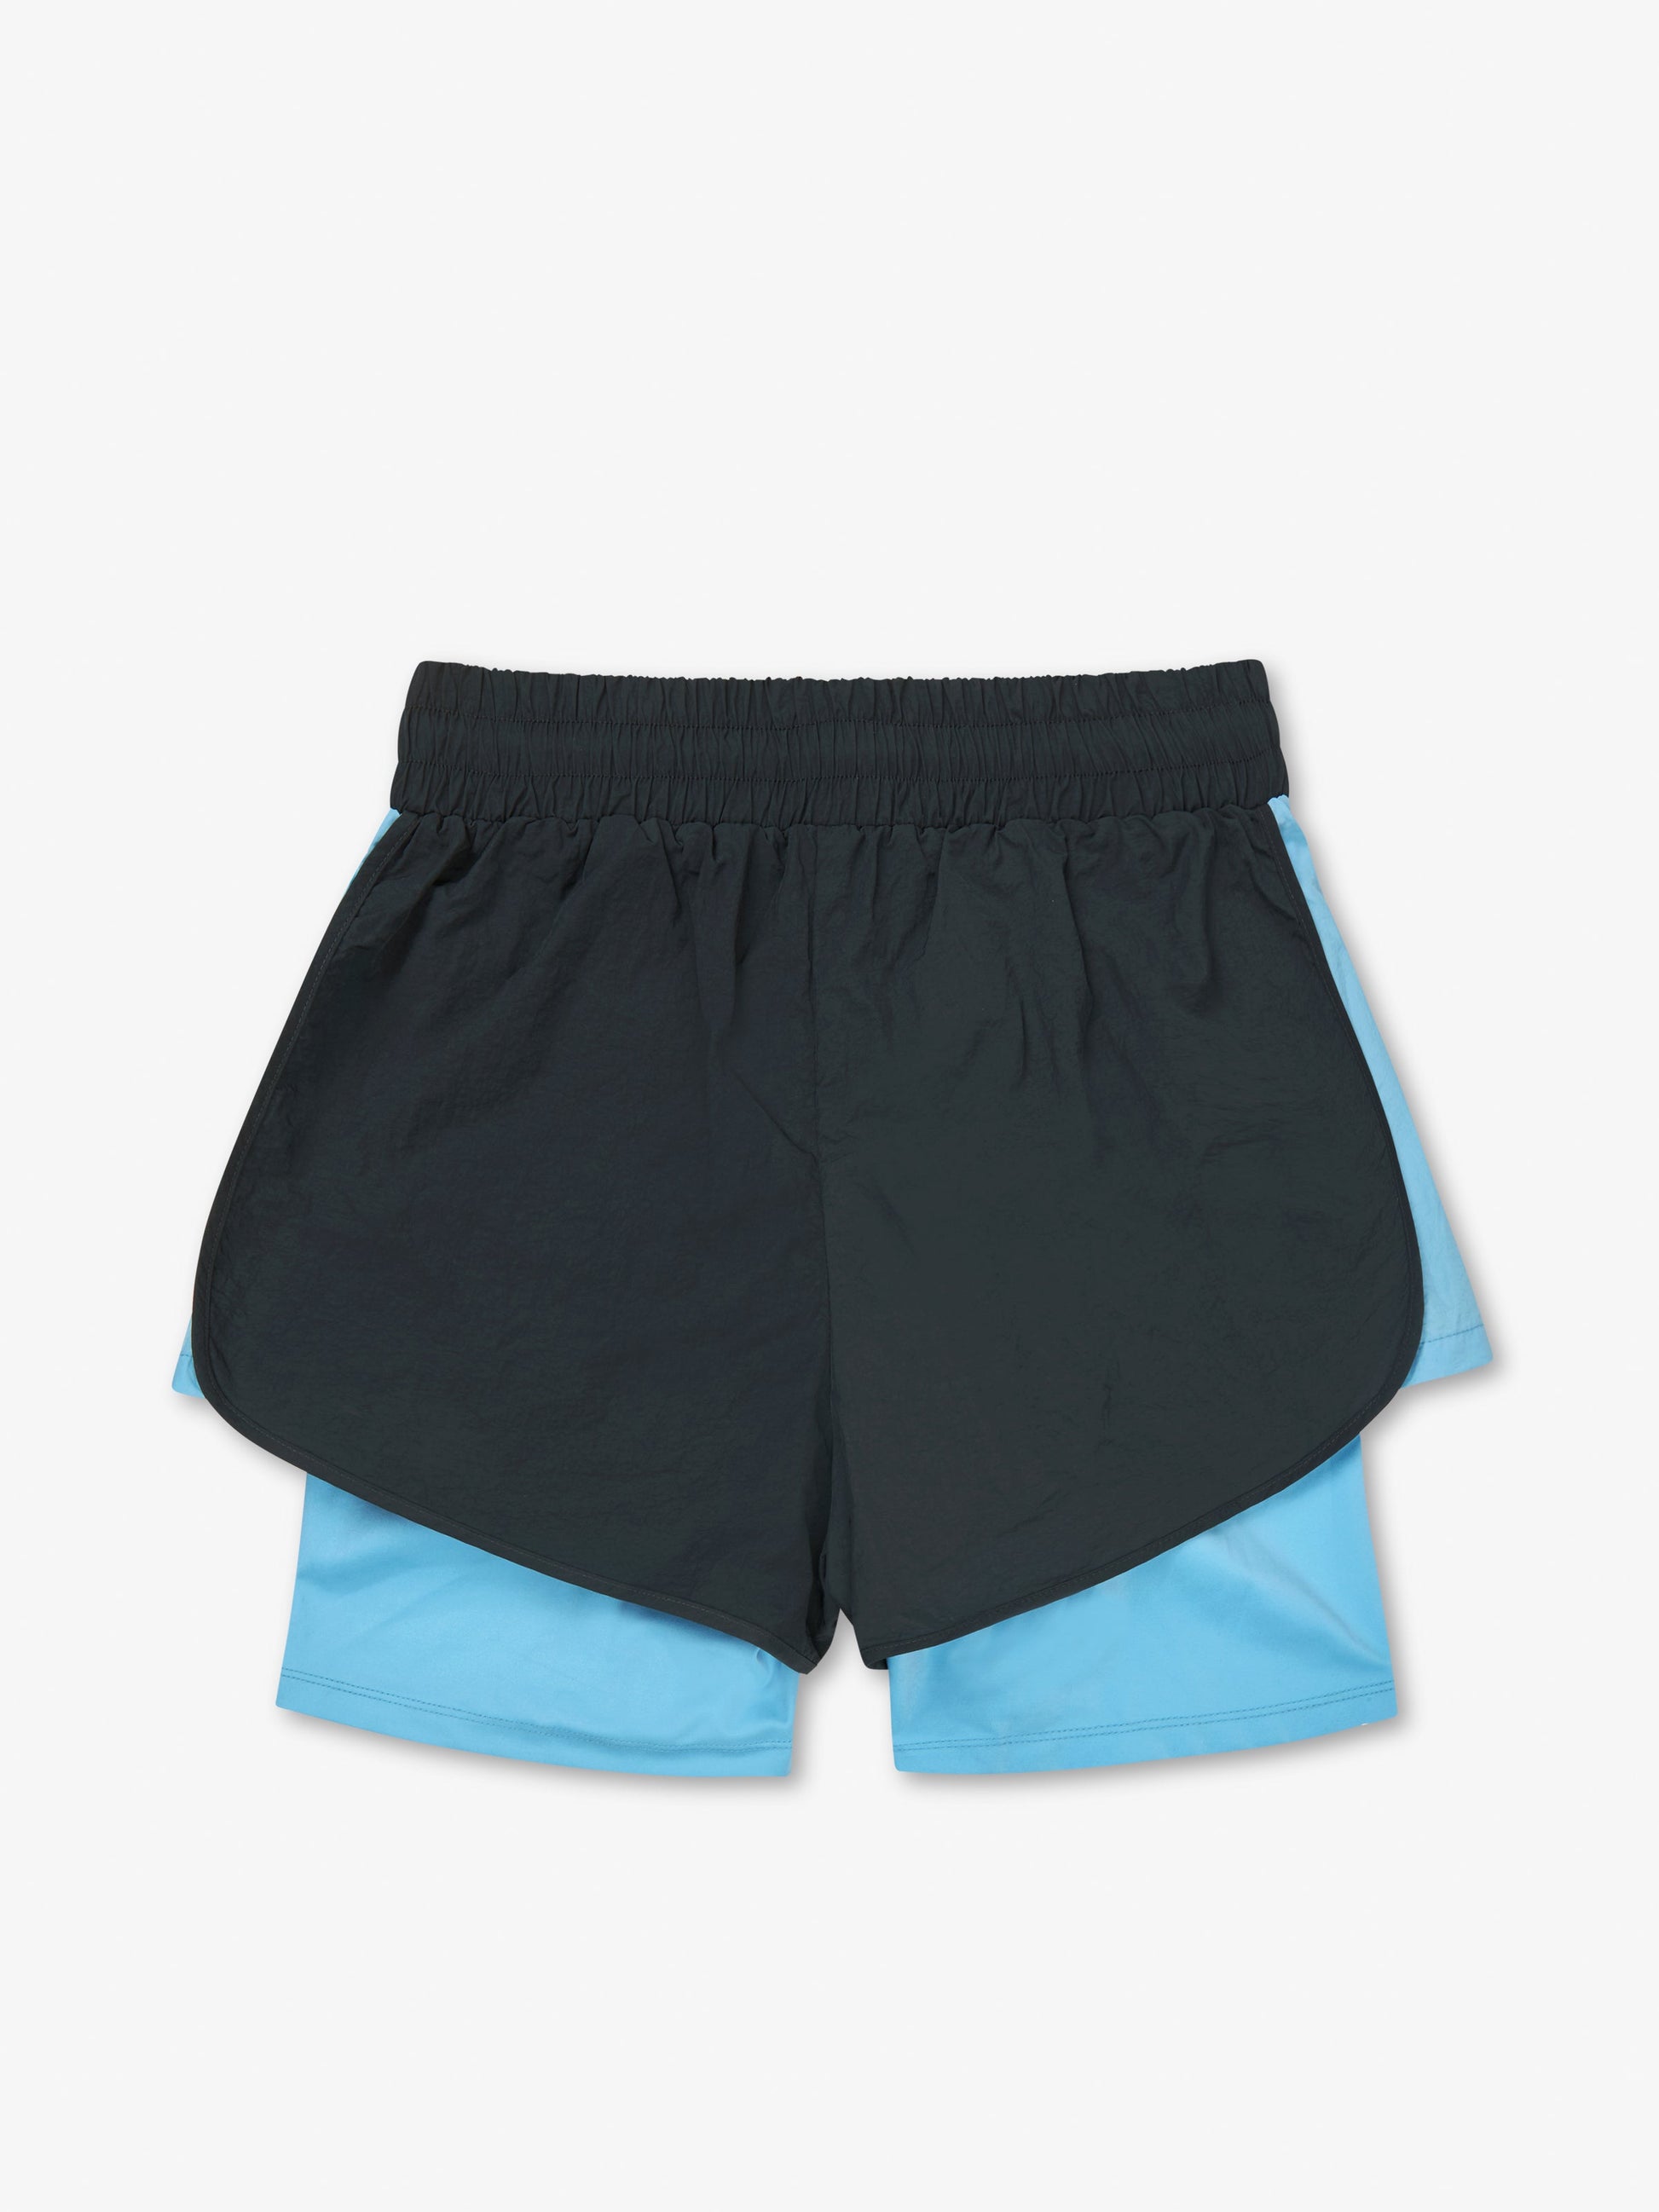 7 DAYS Althea 2 in 1 Shorts Shorts 045 Forest River grey